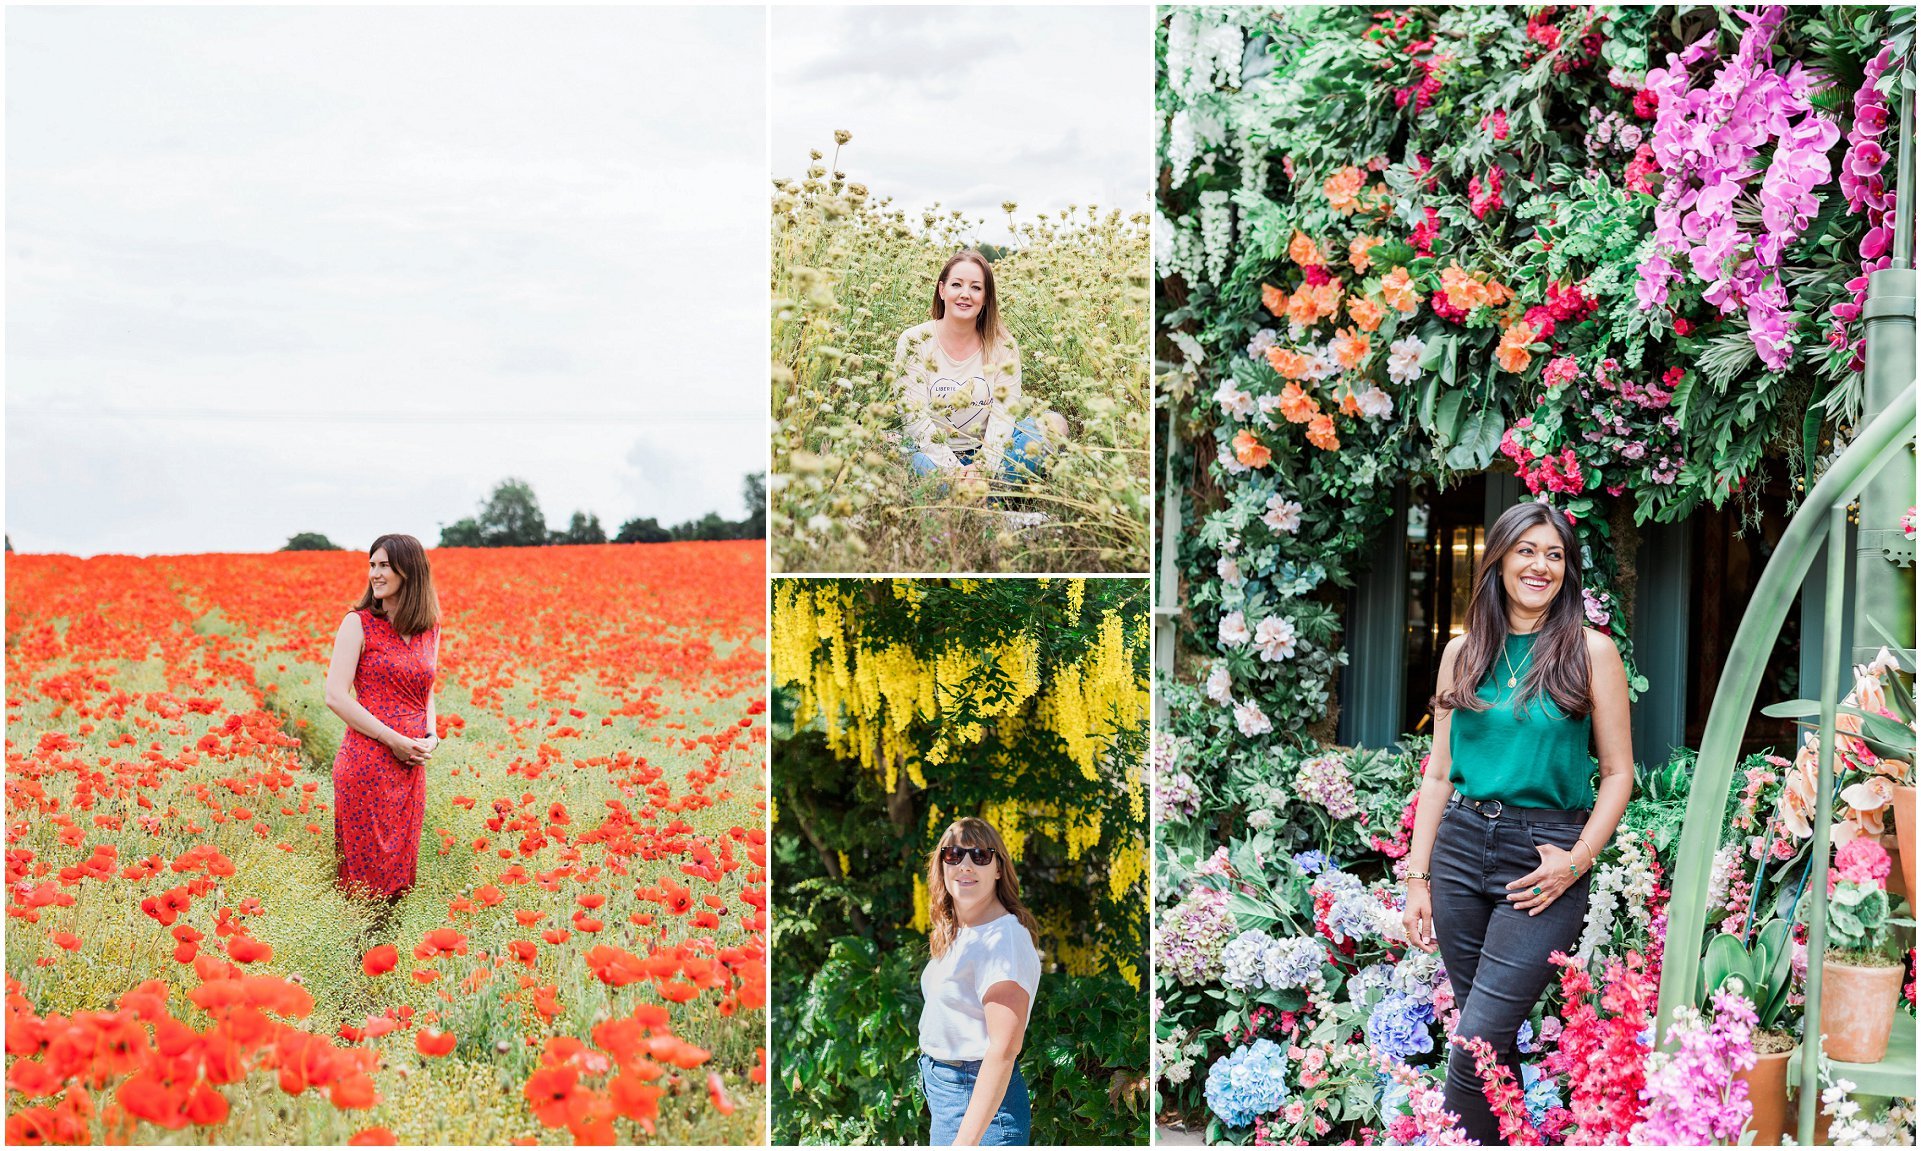 floral portraits for summer brand shoots - images by London branding photographer AKP Branding Stories